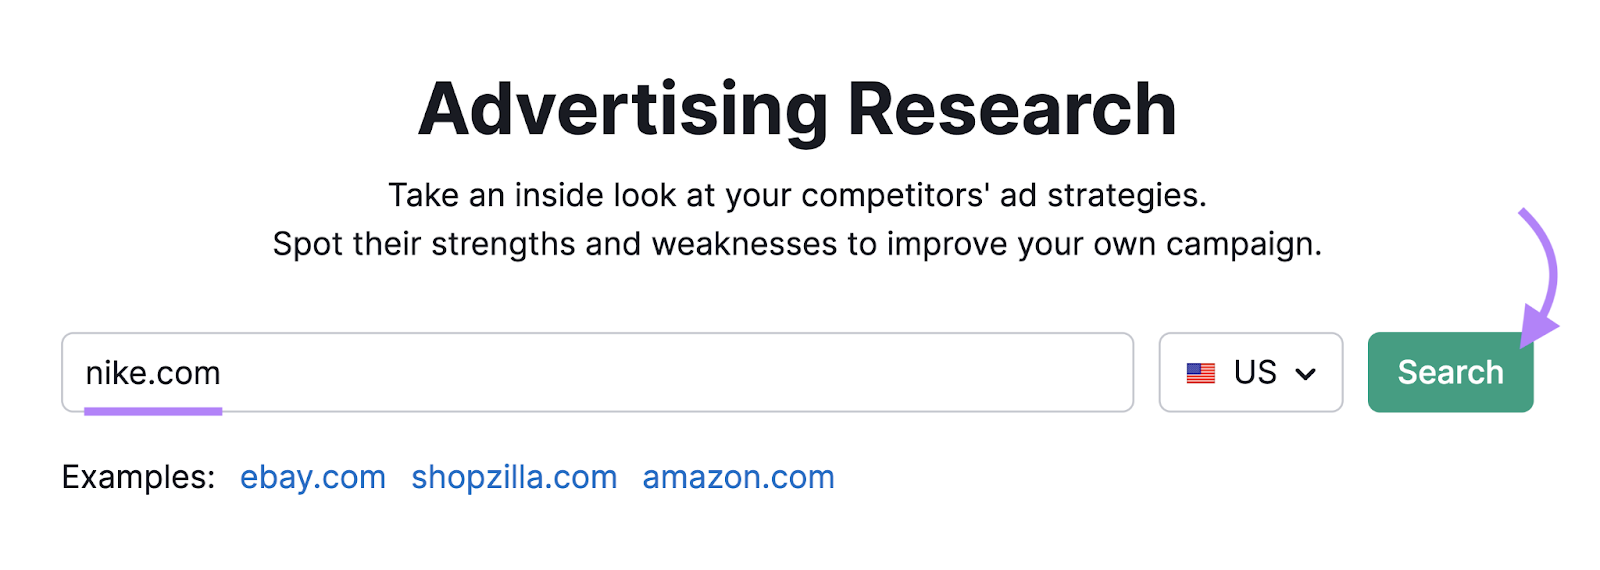 search for nike.com in advertising research tool